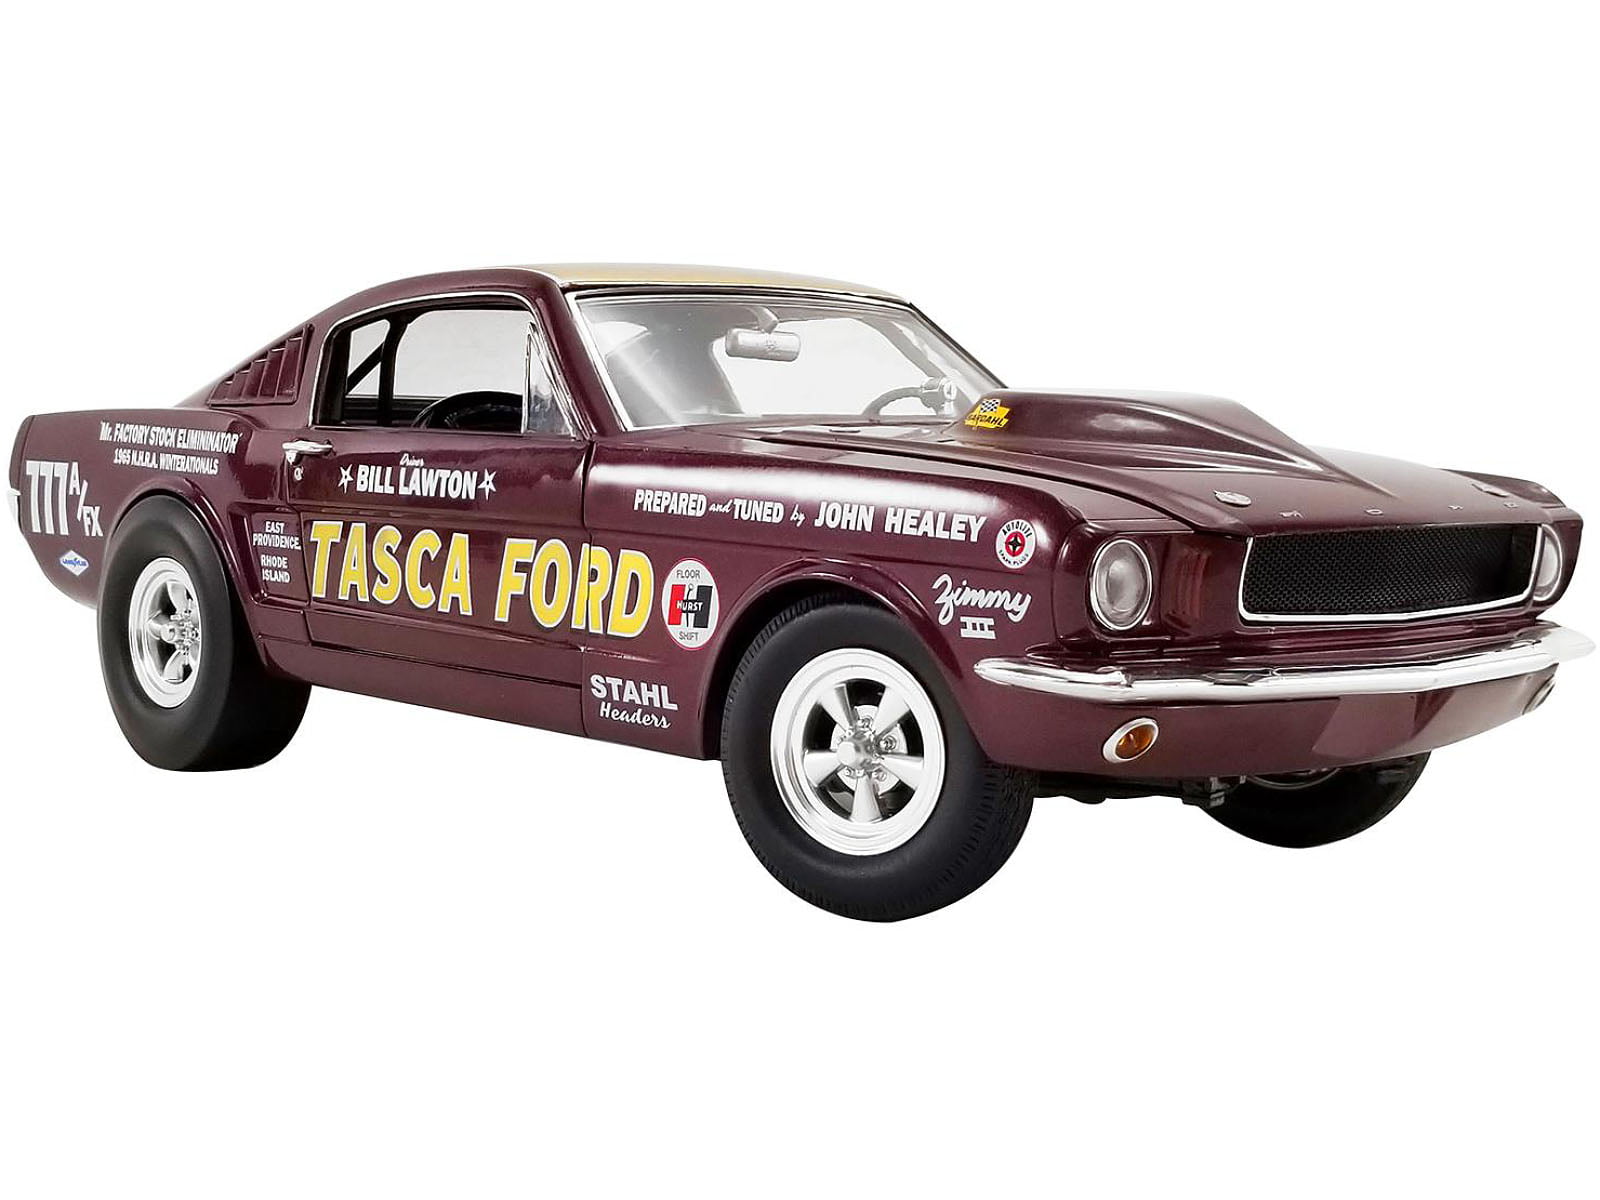 FORD Mustang Fastback 1966 Details about   Scale model car 1:64